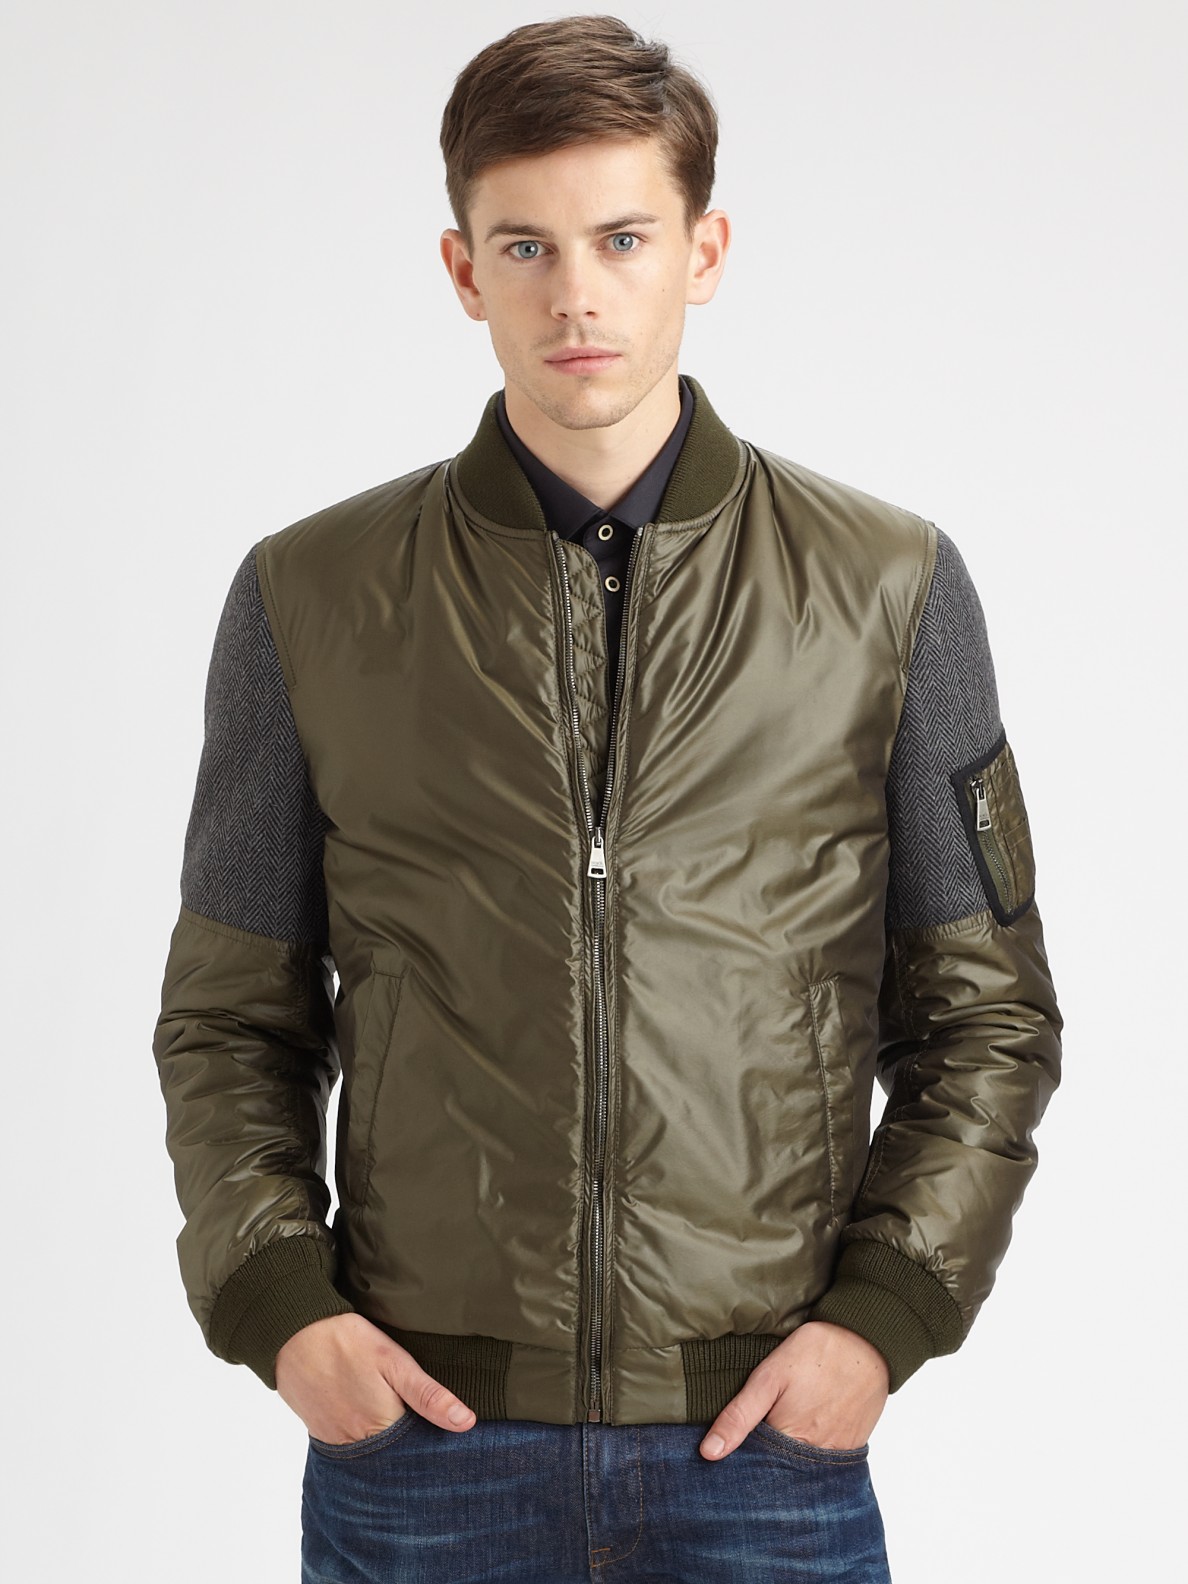 Lyst - Dolce & Gabbana Puffy Bomber Jacket in Natural for Men